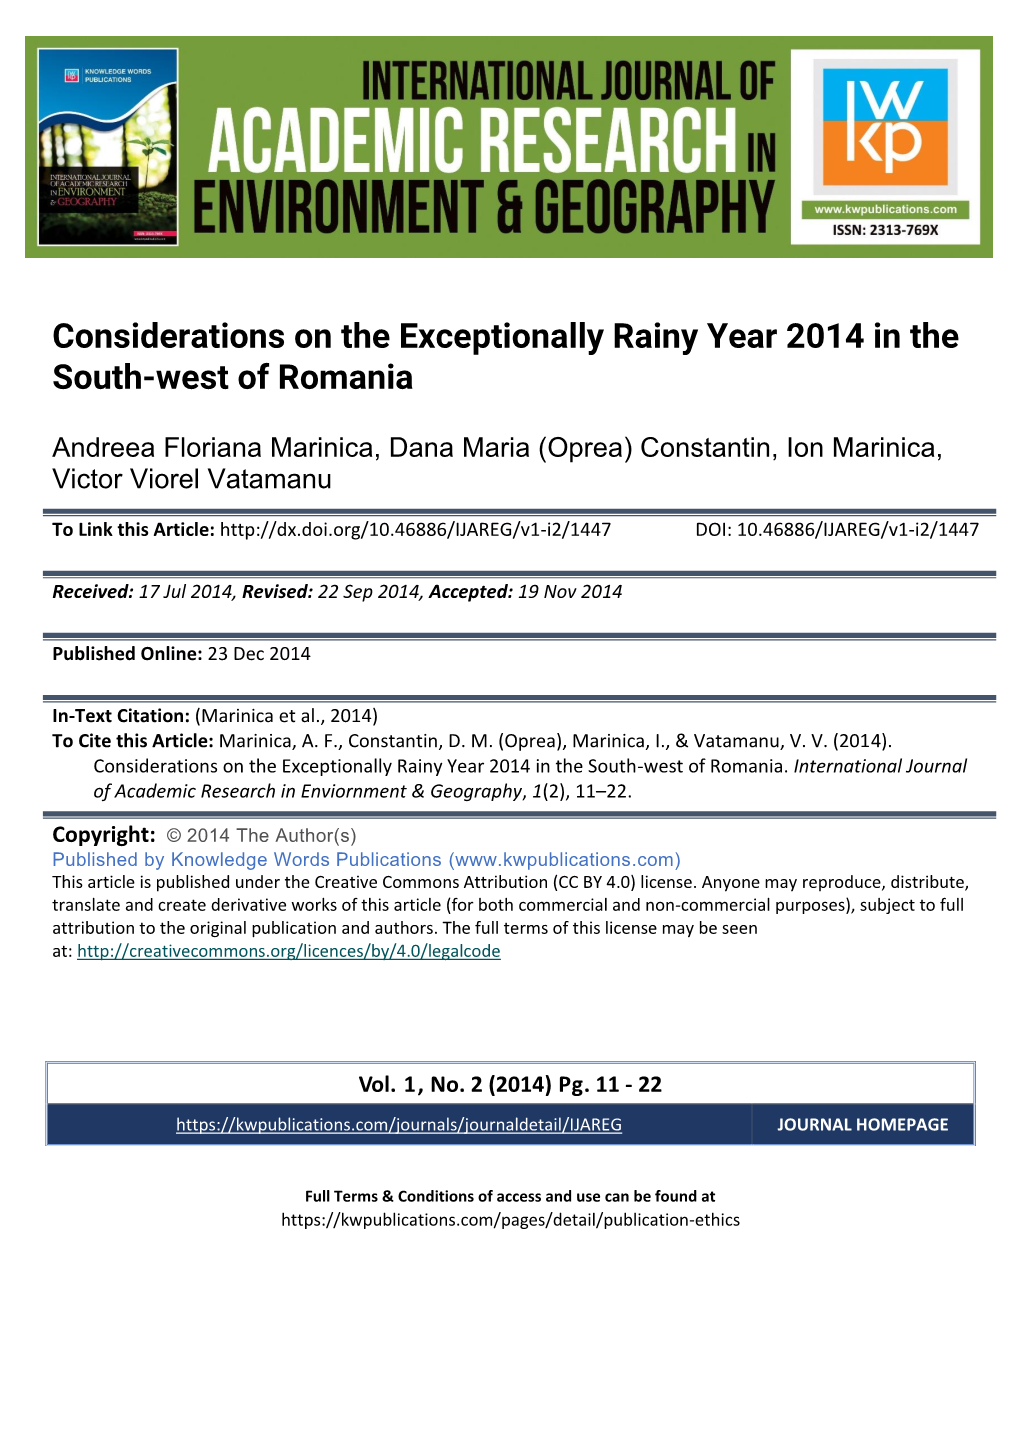 Considerations on the Exceptionally Rainy Year 2014 in the South-West of Romania